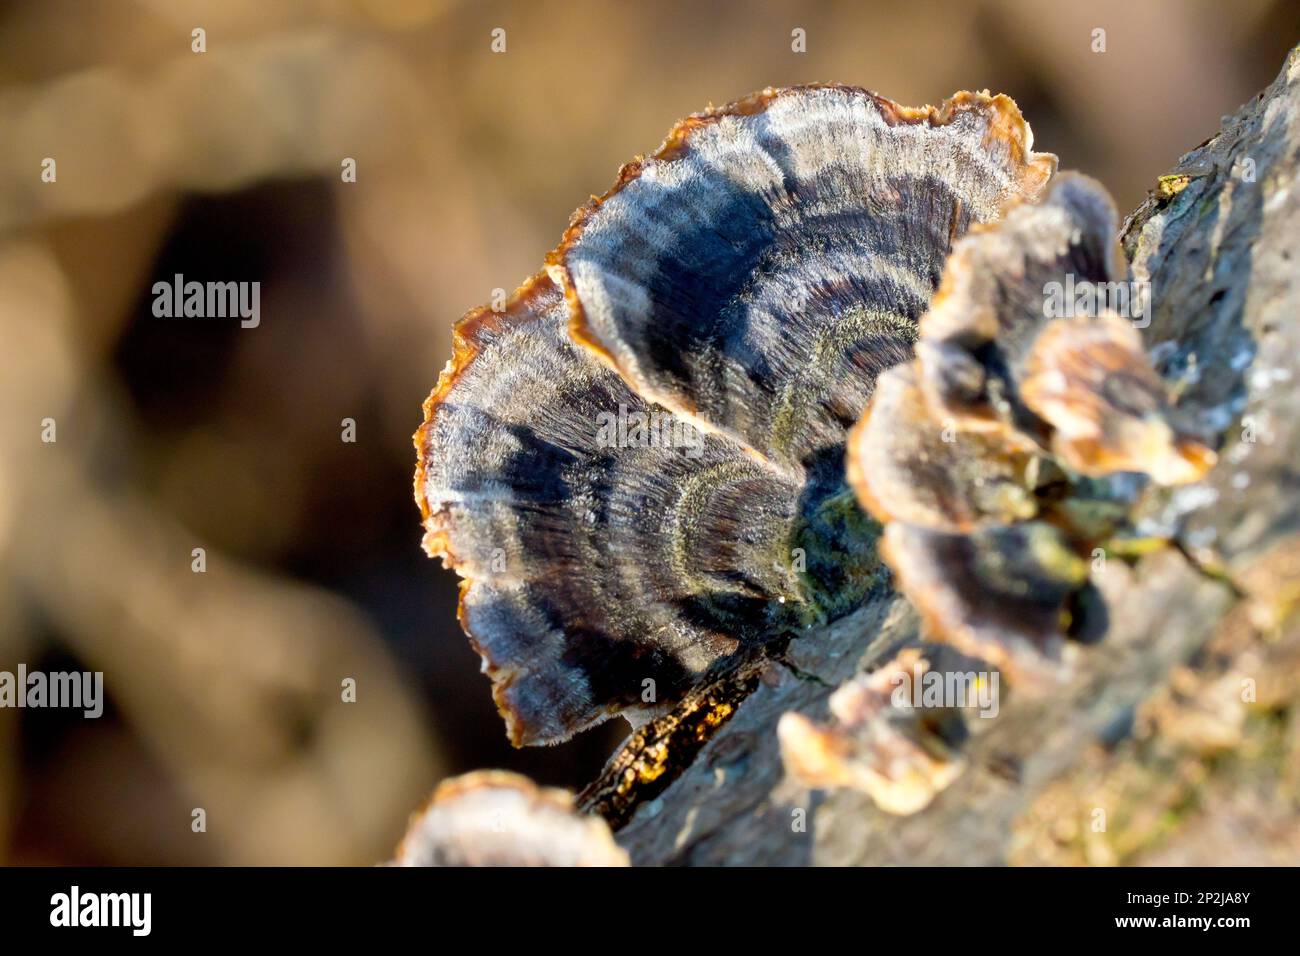 Turkeytail Fungus (trametes versicolor), close up of the semi-circular fruiting bodies showing the familiar concentric coloured stripes. Stock Photo